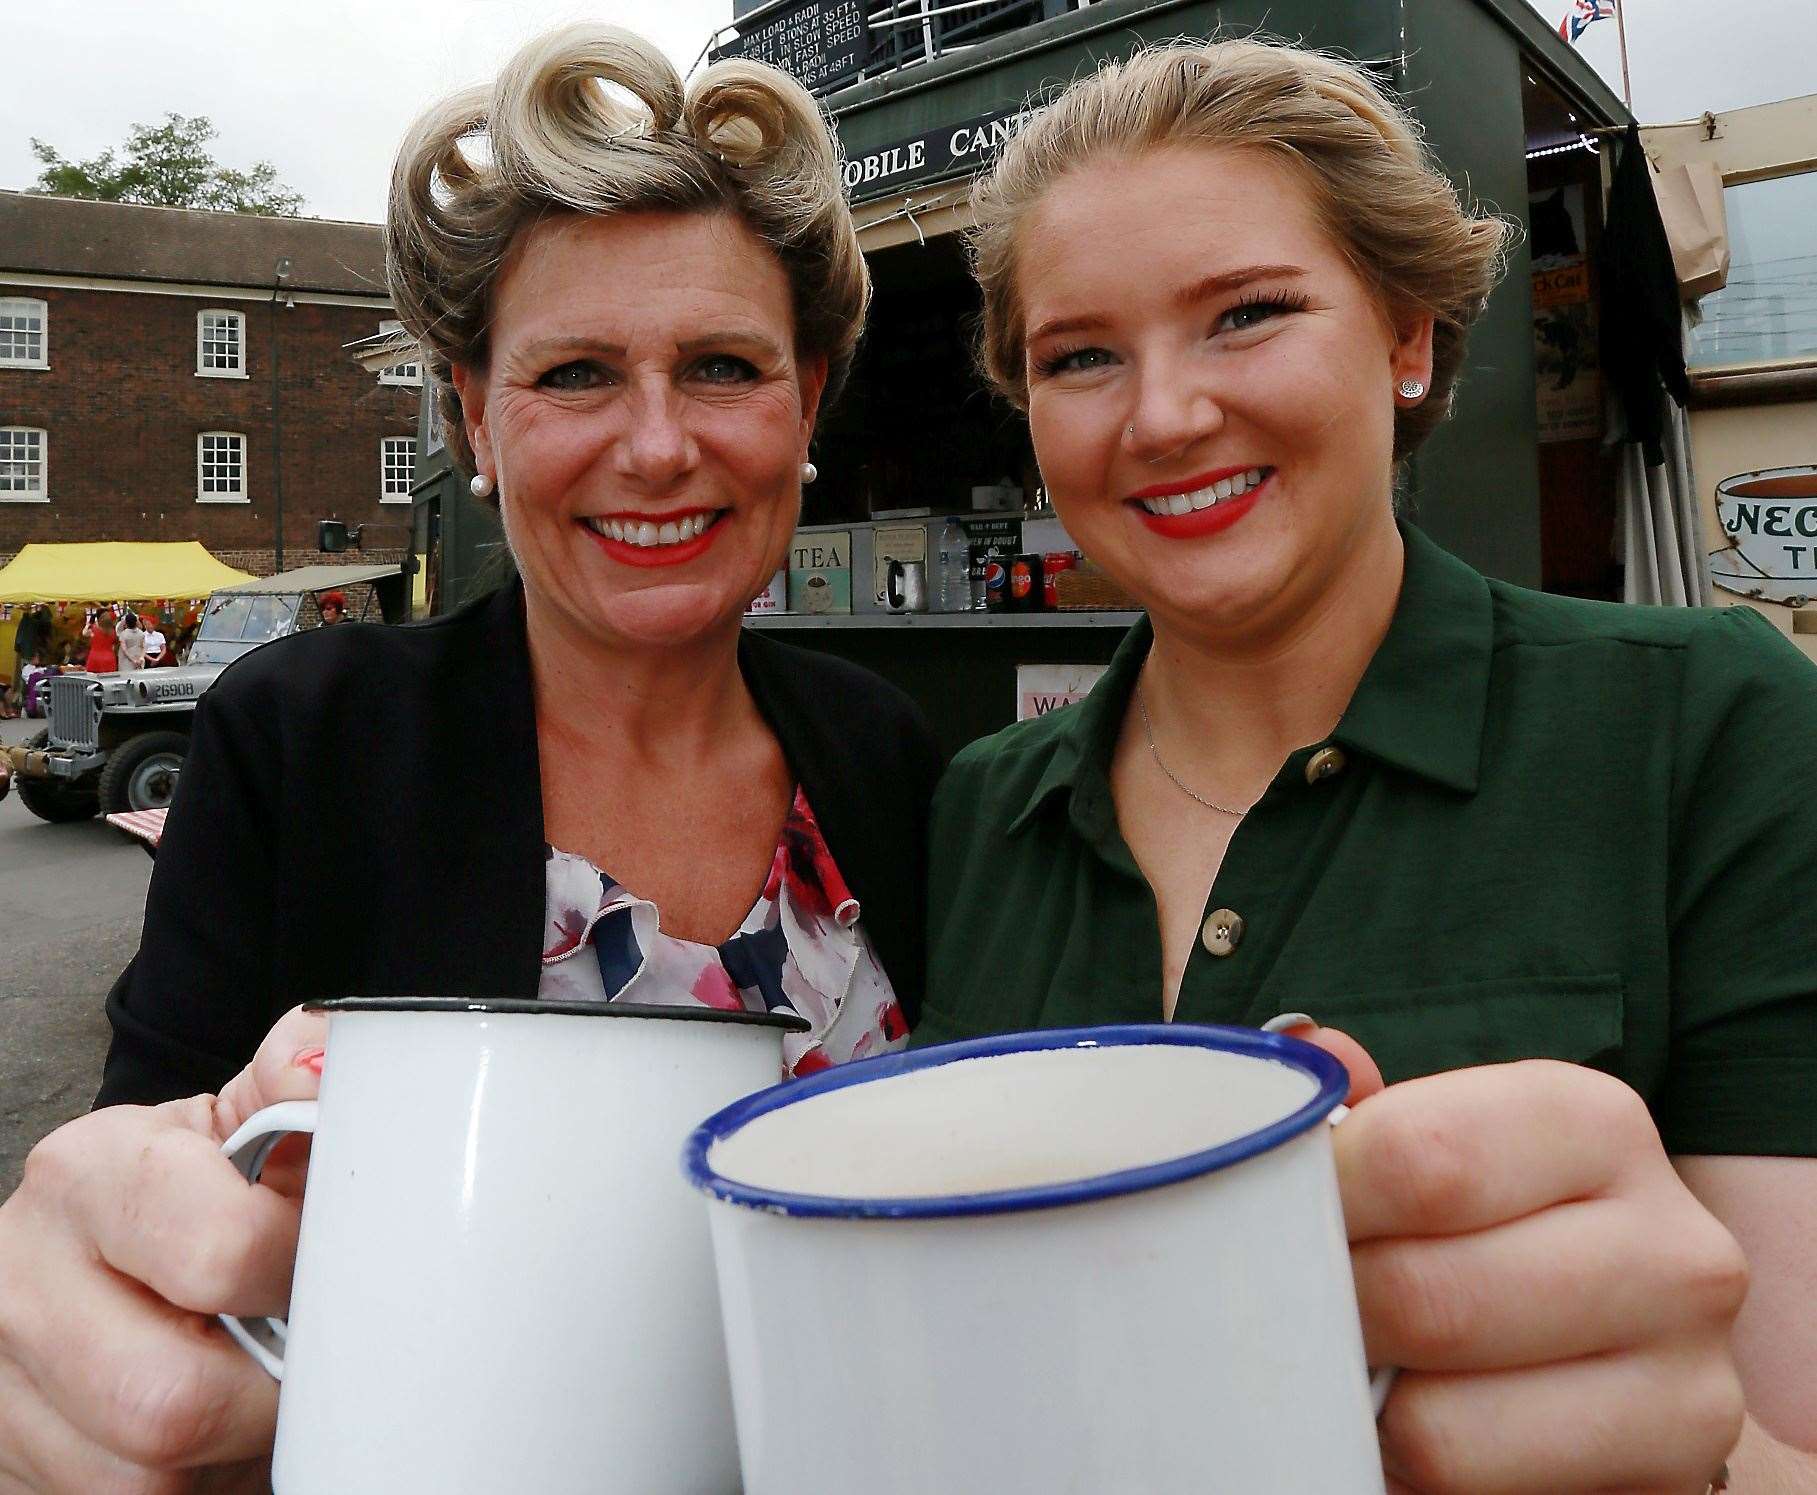 Keep calm and celebrate VE Day 75 40s style - Pictured Joanne Butler (left) and Jayme Goodger at last year's Salute to the 40s at the Historic Dockyard Chatham. The event is currently scheduled for September, government restrictions permitting Picture: Phil Lee